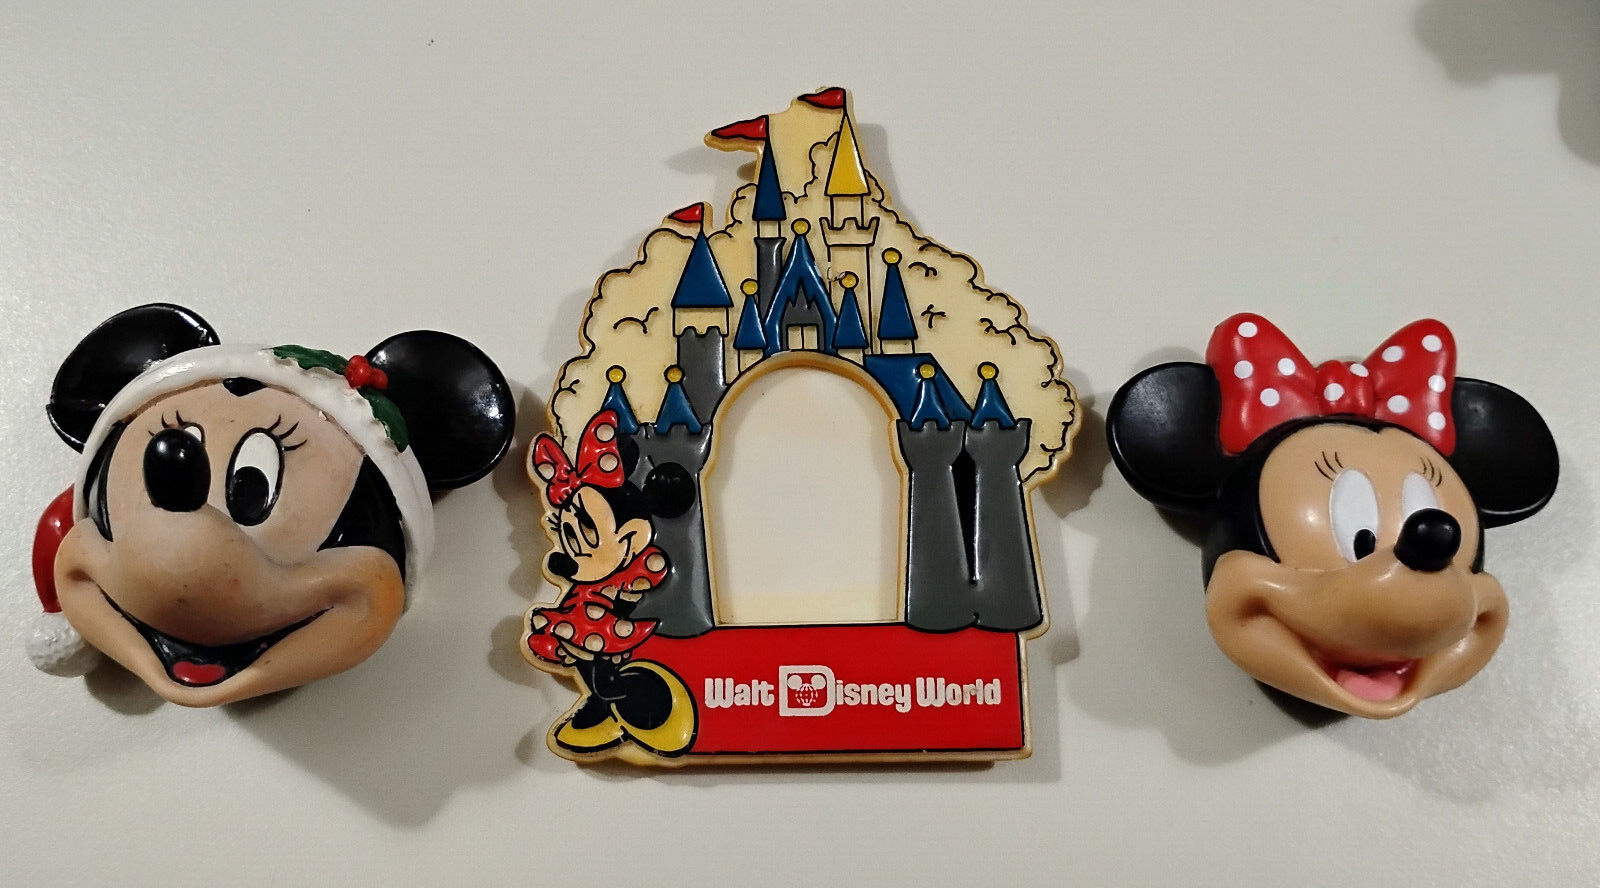 Vintage MINNIE MOUSE Heads 3D Resin Christmas Photo Refrigerator Magnets Disney